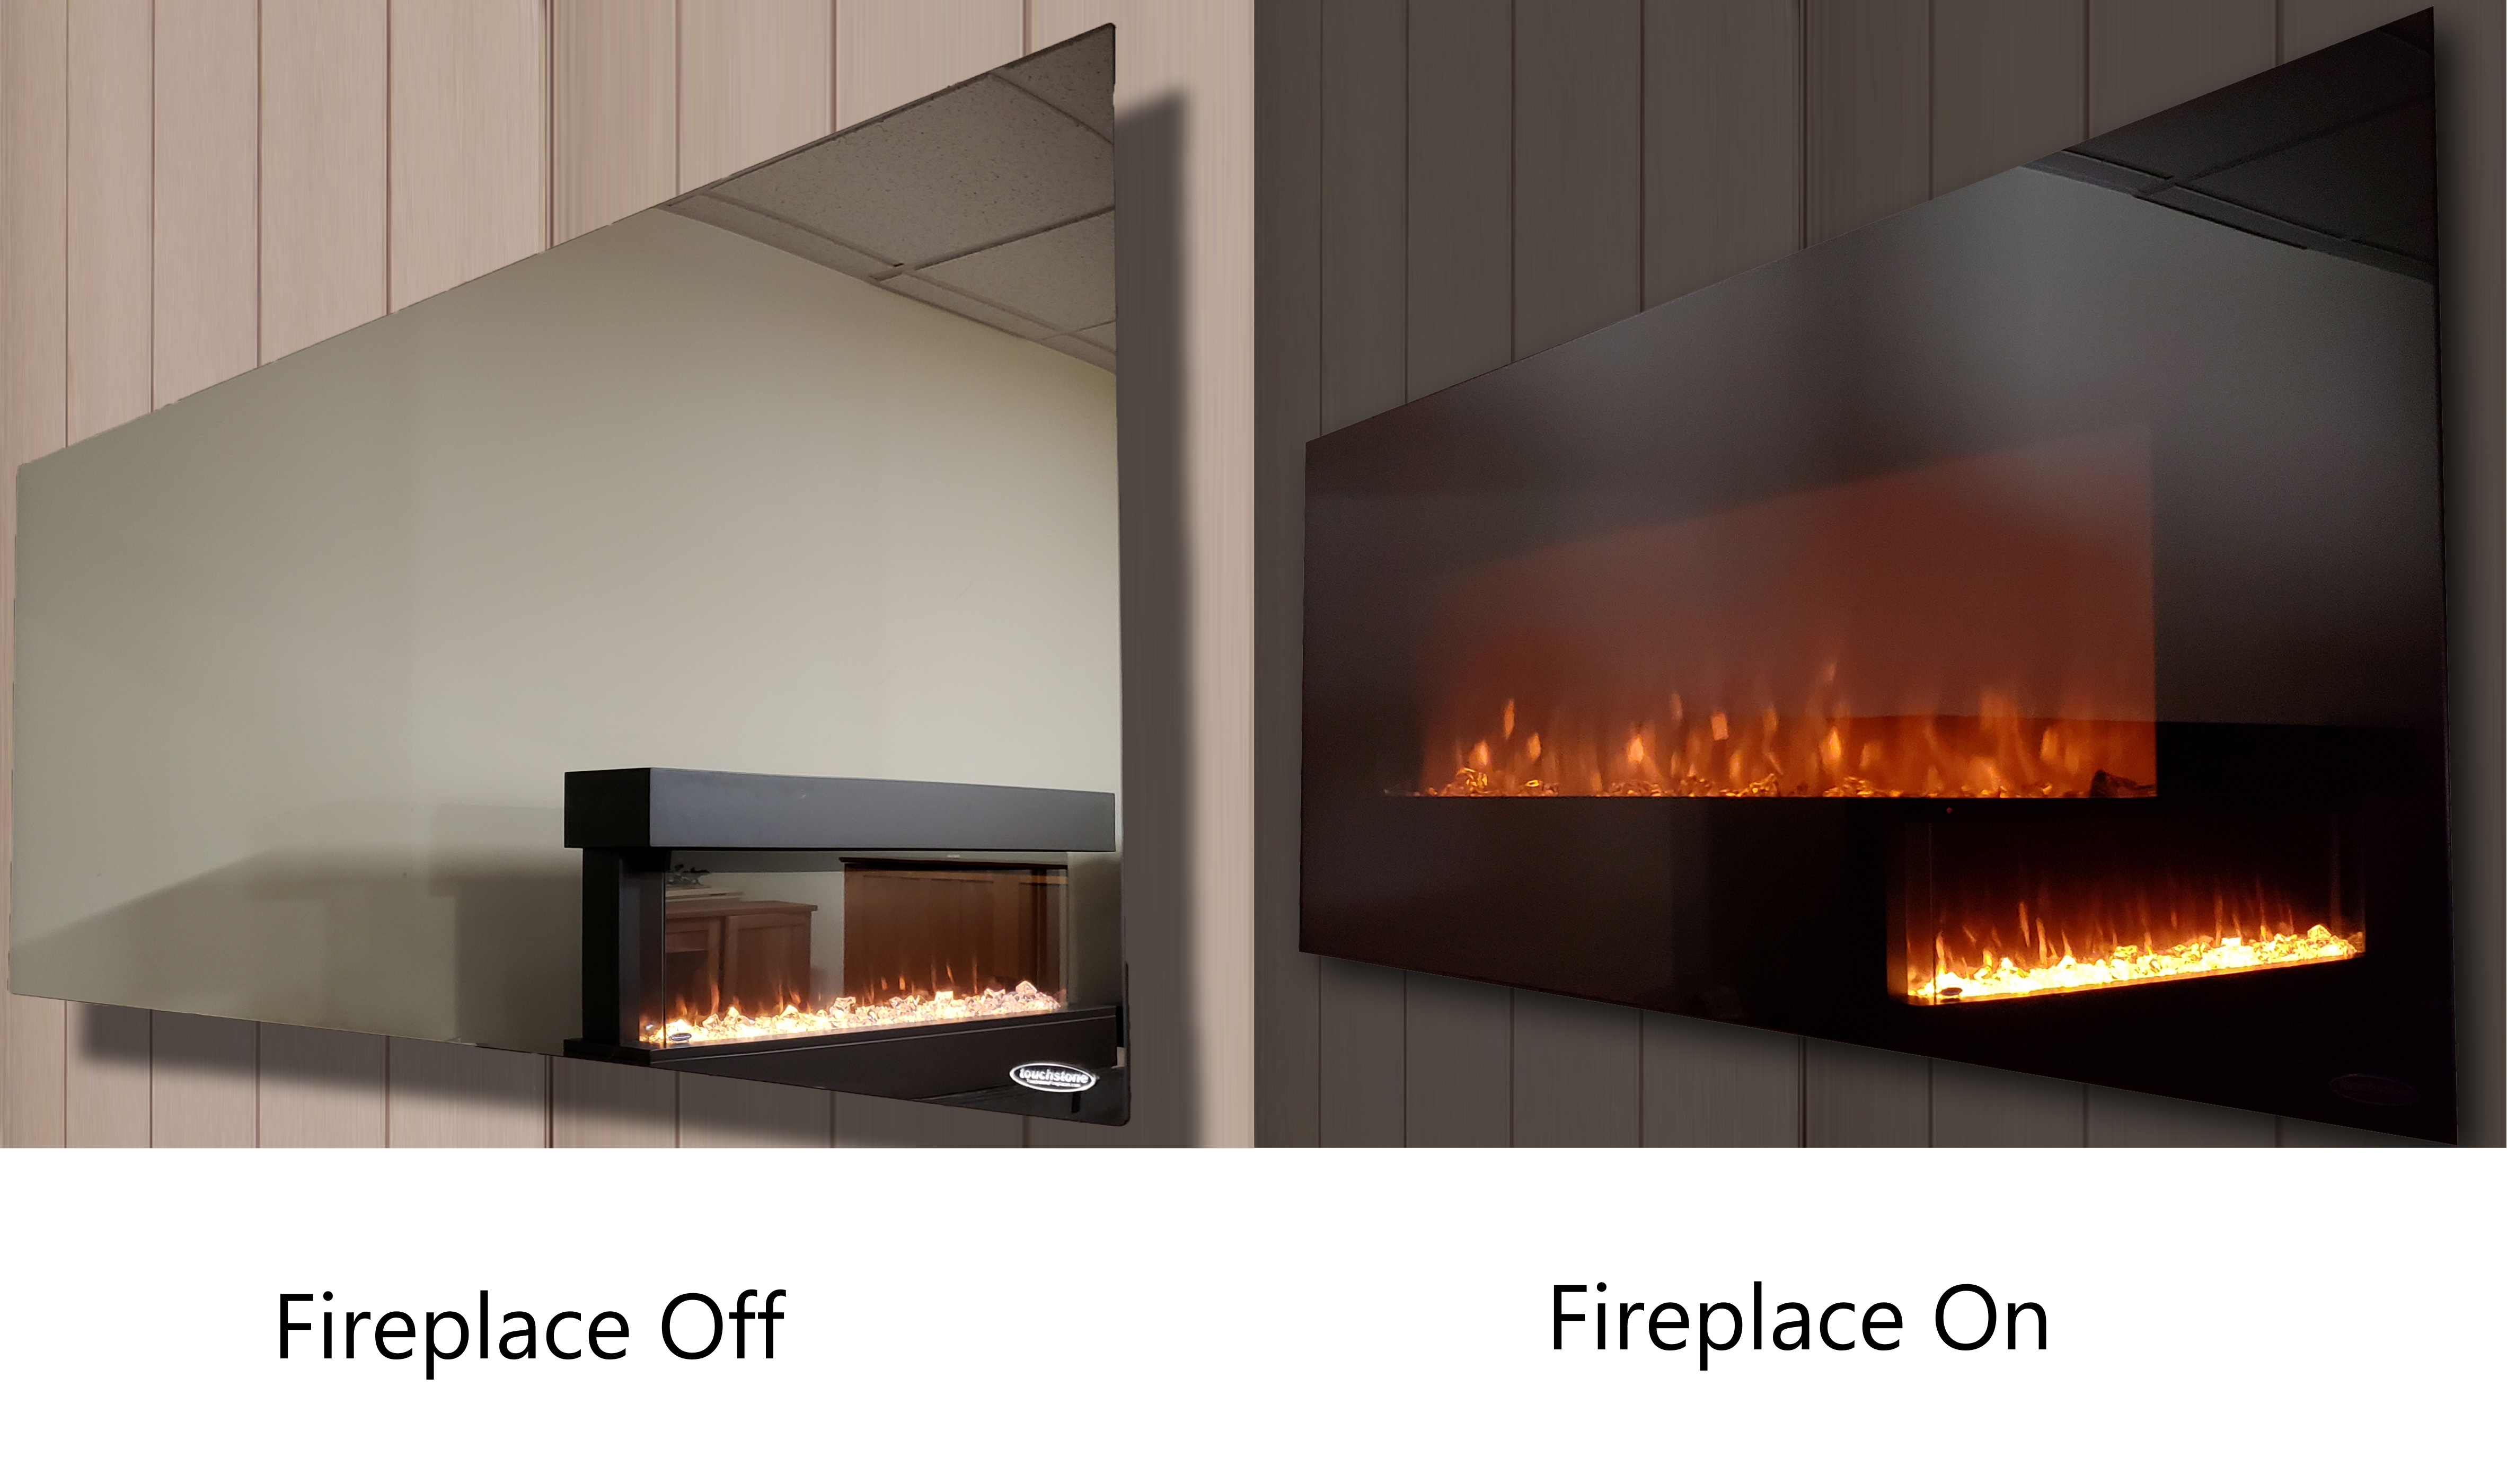 Mirror Onyx 80008 50 inch Wall Mounted Electric Fireplace pictured on and off.